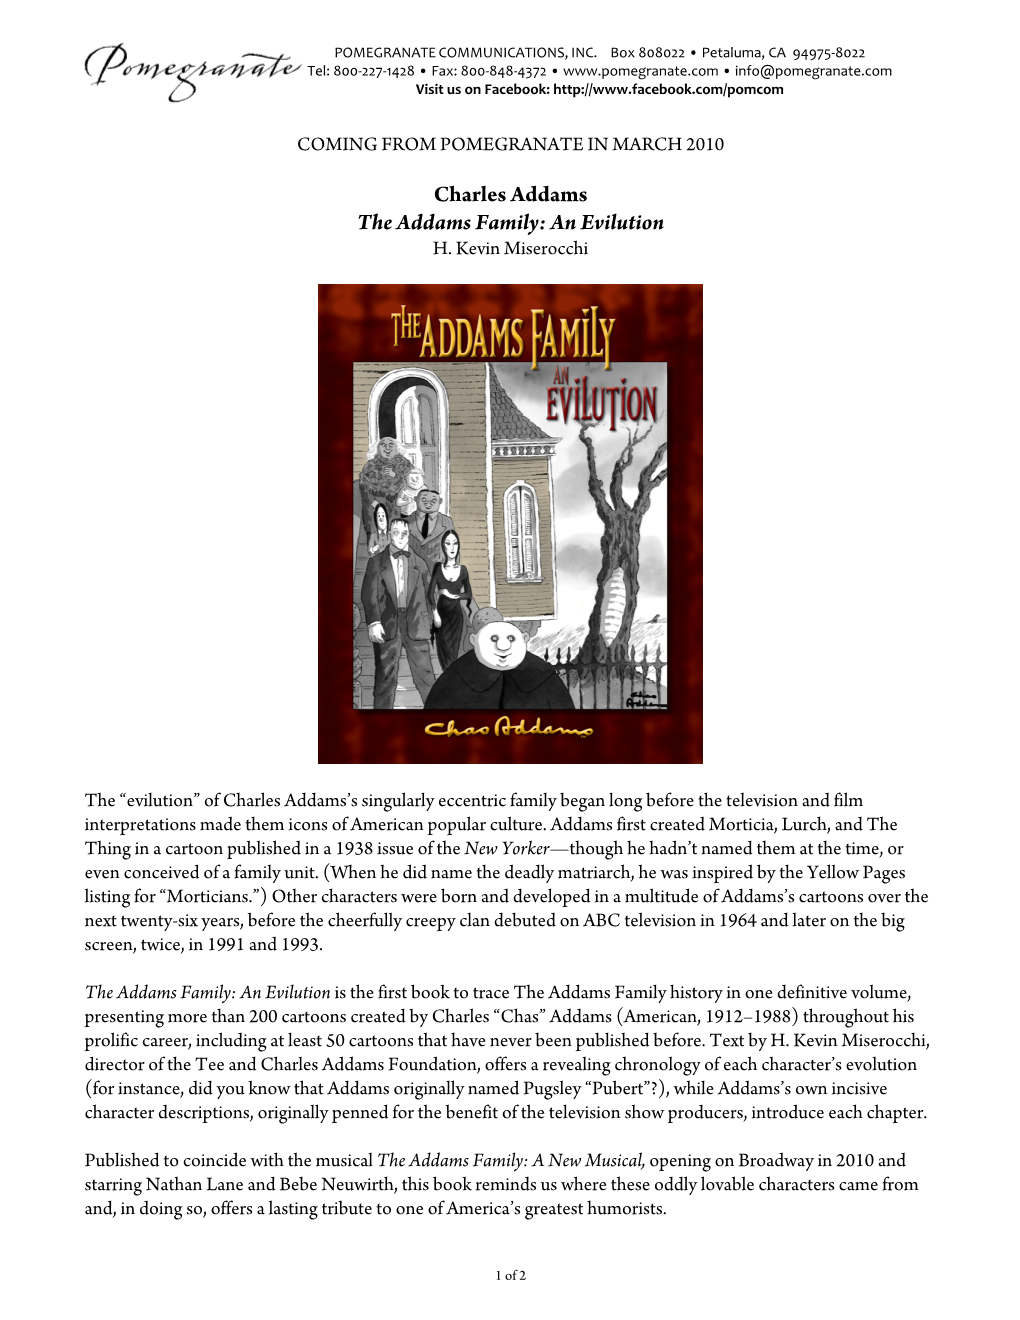 Charles Addams the Addams Family: an Evilution H